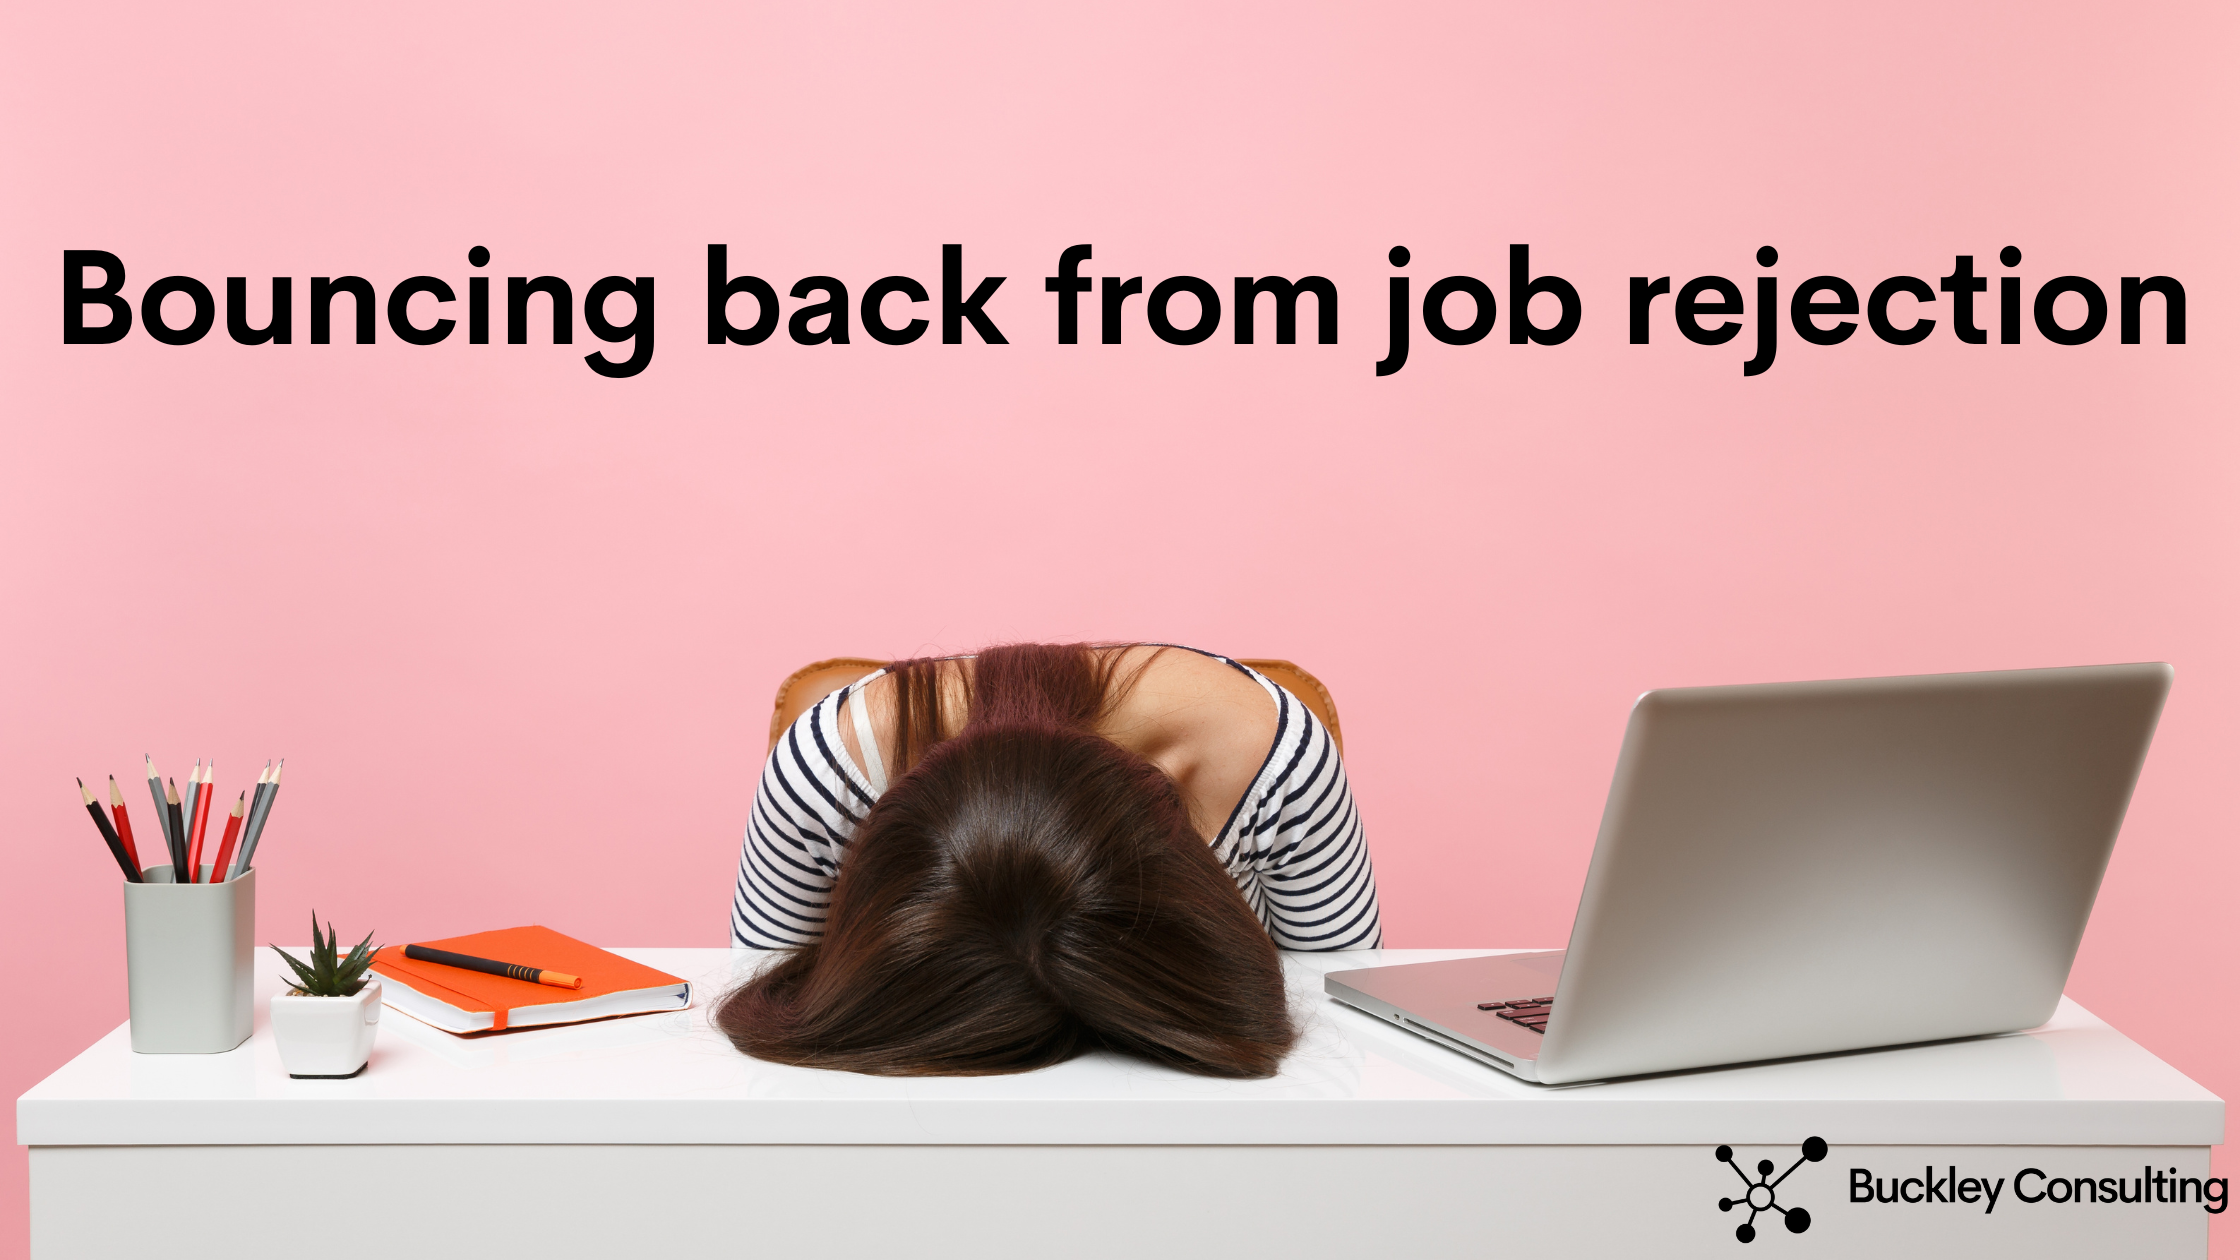 Bouncing back from job rejection